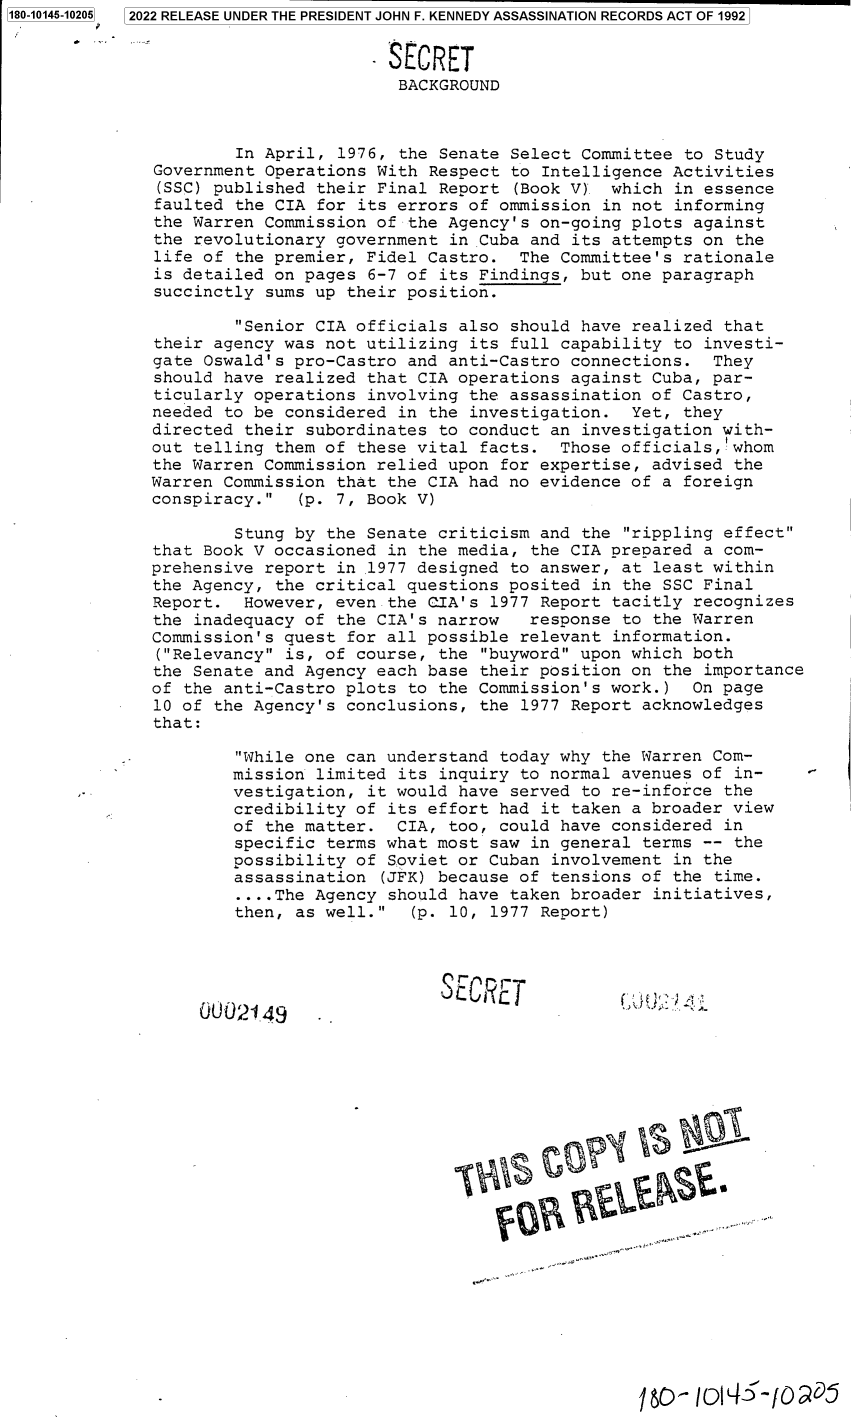 handle is hein.jfk/jfkarch82816 and id is 1 raw text is: 2022 RELEASE UNDER THE PRESIDENT JOHN F. KENNEDY ASSASSINATION RECORDS ACT OF 1992

SECRET
BACKGROUND
In April, 1976, the Senate Select Committee to Study
Government Operations With Respect to Intelligence Activities
(SSC) published their Final Report (Book V) which in essence
faulted the CIA for its errors of ommission in not informing
the Warren Commission of the Agency's on-going plots against
the revolutionary government in Cuba and its attempts on the
life of the premier, Fidel Castro. The Committee's rationale
is detailed on pages 6-7 of its Findings, but one paragraph
succinctly sums up their position.
Senior CIA officials also should have realized that
their agency was not utilizing its full capability to investi-
gate Oswald's pro-Castro and anti-Castro connections. They
should have realized that CIA operations against Cuba, par-
ticularly operations involving the assassination of Castro,
needed to be considered in the investigation. Yet, they
directed their subordinates to conduct an investigation with-
out telling them of these vital facts. Those officials, whom
the Warren Commission relied upon for expertise, advised the
Warren Commission that the CIA had no evidence of a foreign
conspiracy.  (p. 7, Book V)
Stung by the Senate criticism and the rippling effect
that Book V occasioned in the media, the CIA prepared a com-
prehensive report in 1977 designed to answer, at least within
the Agency, the critical questions posited in the SSC Final
Report. However, even the CIA's 1977 Report tacitly recognizes
the inadequacy of the CIA's narrow   response to the Warren
Commission's quest for all possible relevant information.
(Relevancy is, of course, the buyword upon which both
the Senate and Agency each base their position on the importance
of the anti-Castro plots to the Commission' s work.) On page
10 of the Agency's conclusions, the 1977 Report acknowledges
that:
While one can understand today why the Warren Com-
mission limited its inquiry to normal avenues of in-
vestigation, it would have served to re-inforce the
credibility of its effort had it taken a broader view
of the matter. CIA, too, could have considered in
specific terms what most saw in general terms -- the
possibility of Soviet or Cuban involvement in the
assassination (JFK) because of tensions of the time.
....The Agency should have taken broader initiatives,
then, as well.  (p. 10, 1977 Report)
rECRE'T
0002149     .
Ic- 10So5

1180-10145-102051


